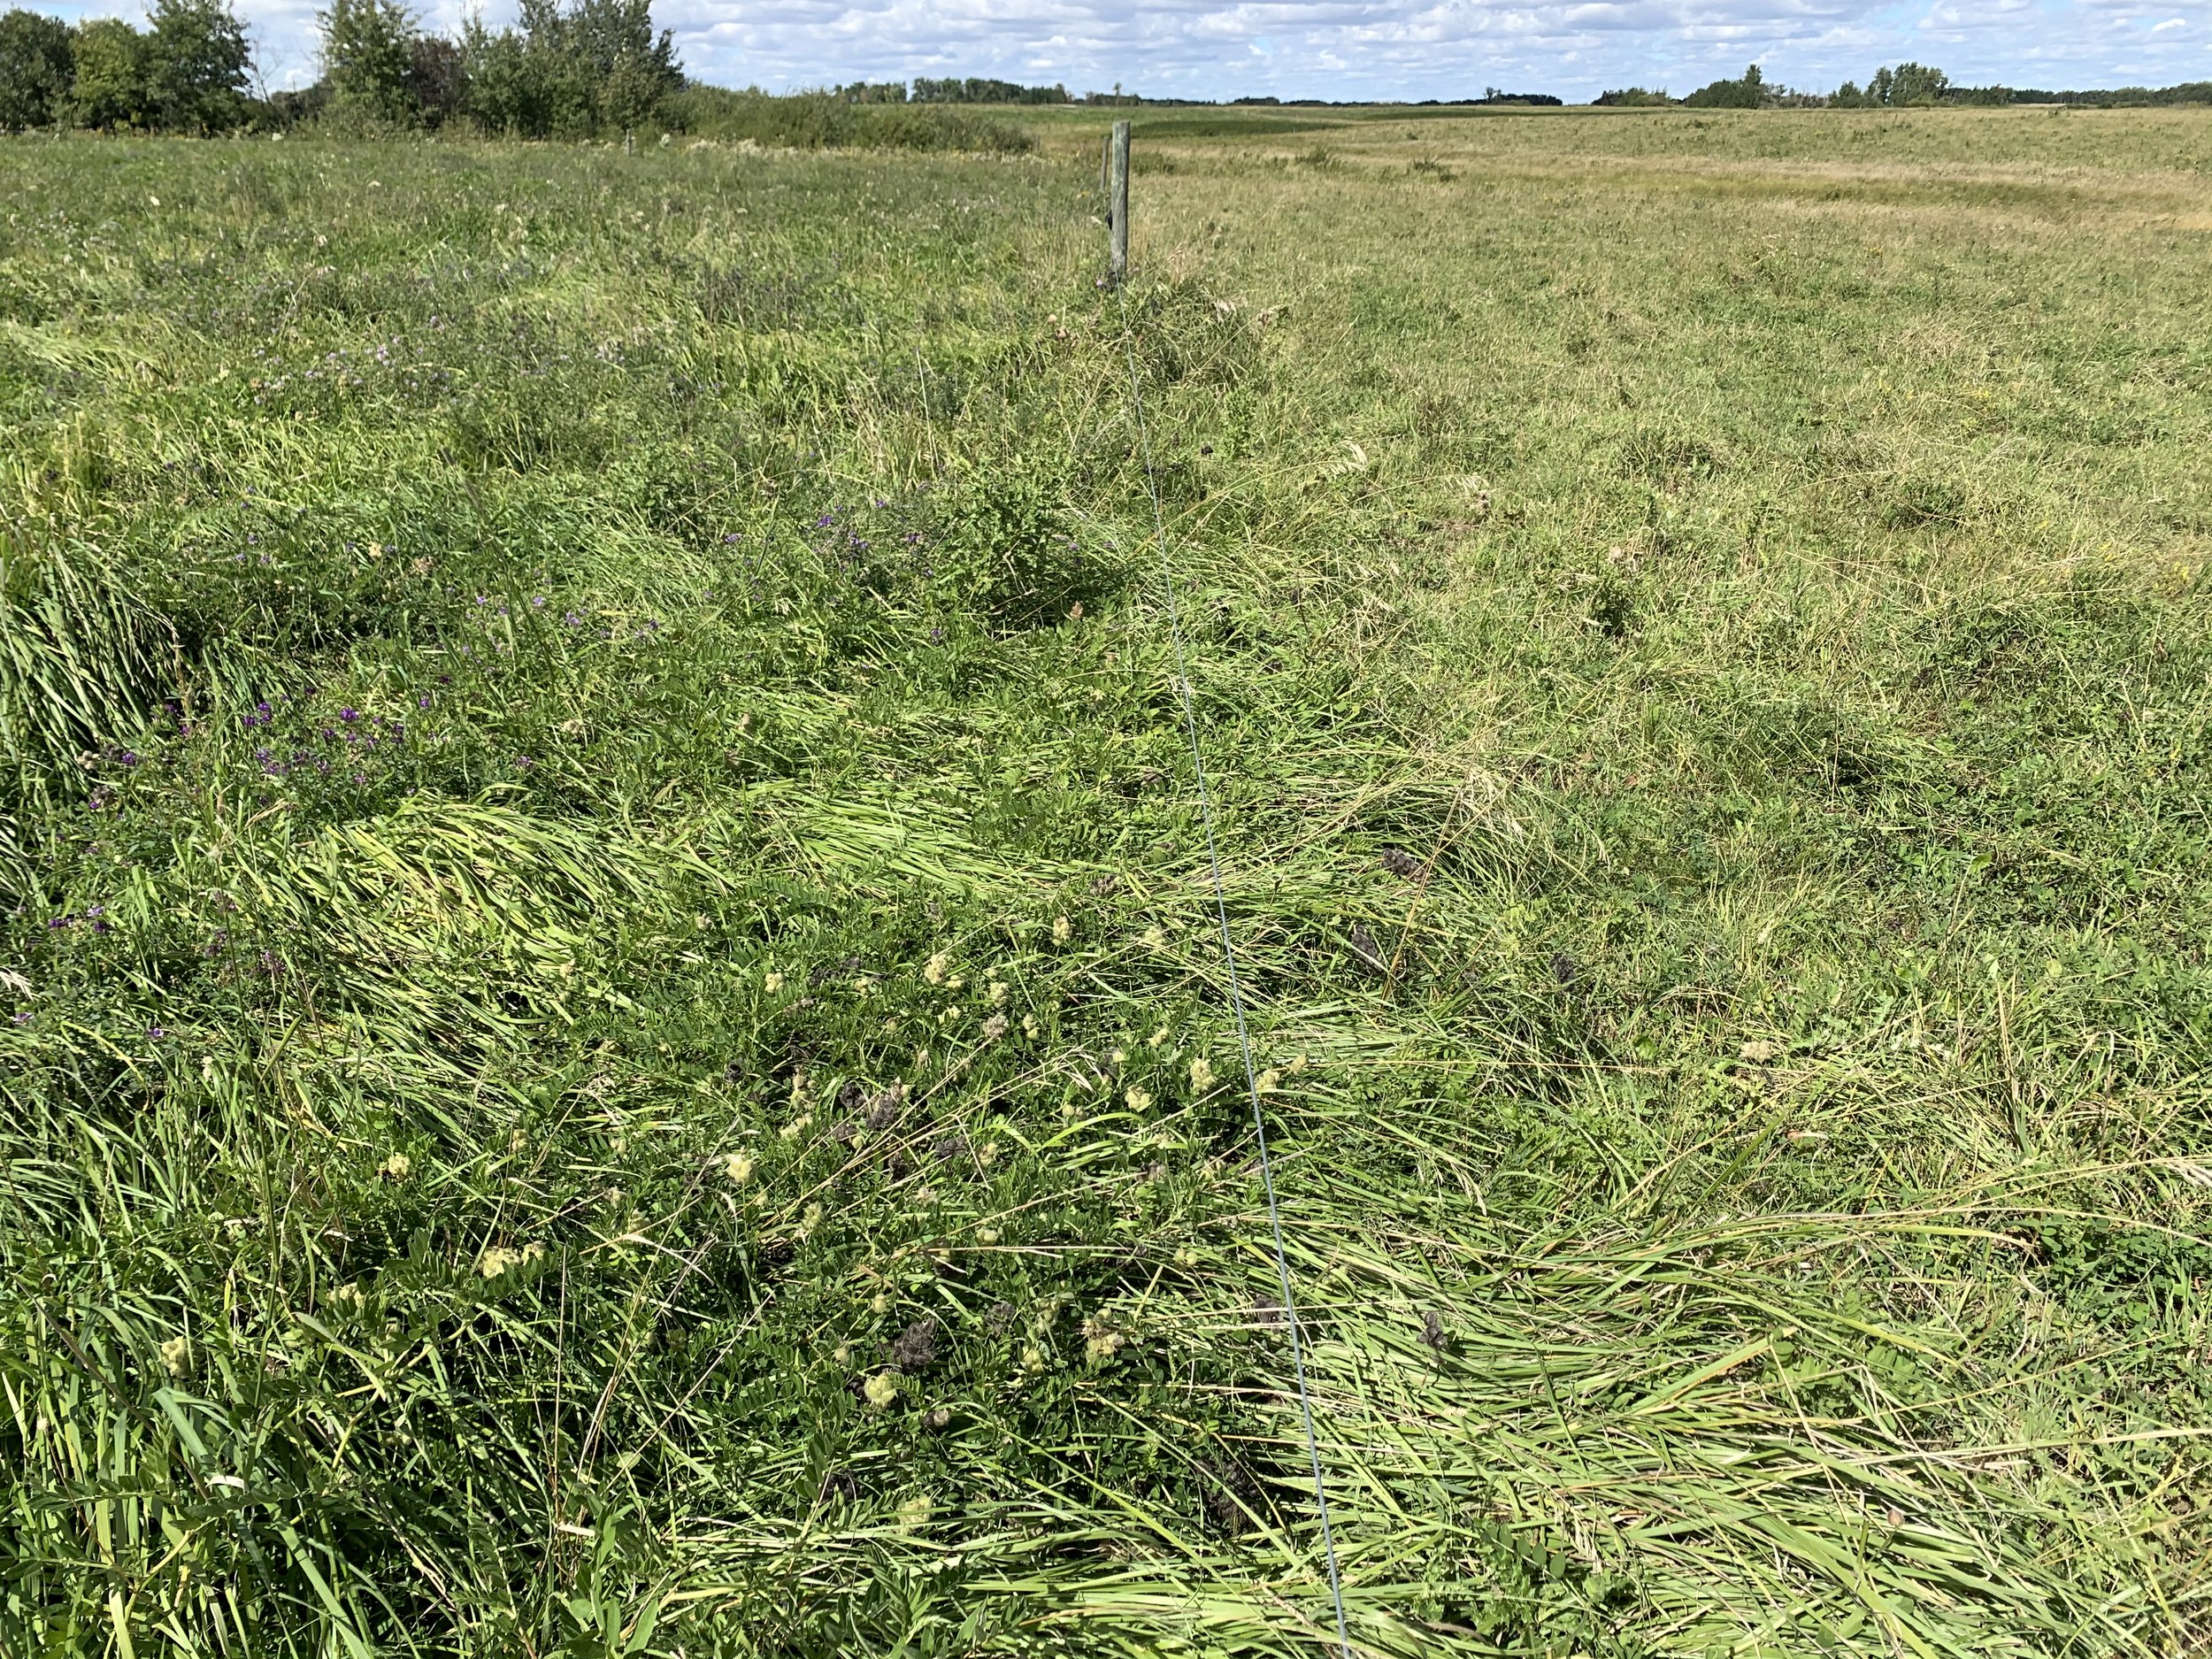  Fenceline comparison of the planned (left) and continuous (right) grazing treatments. September 4, 2020. 